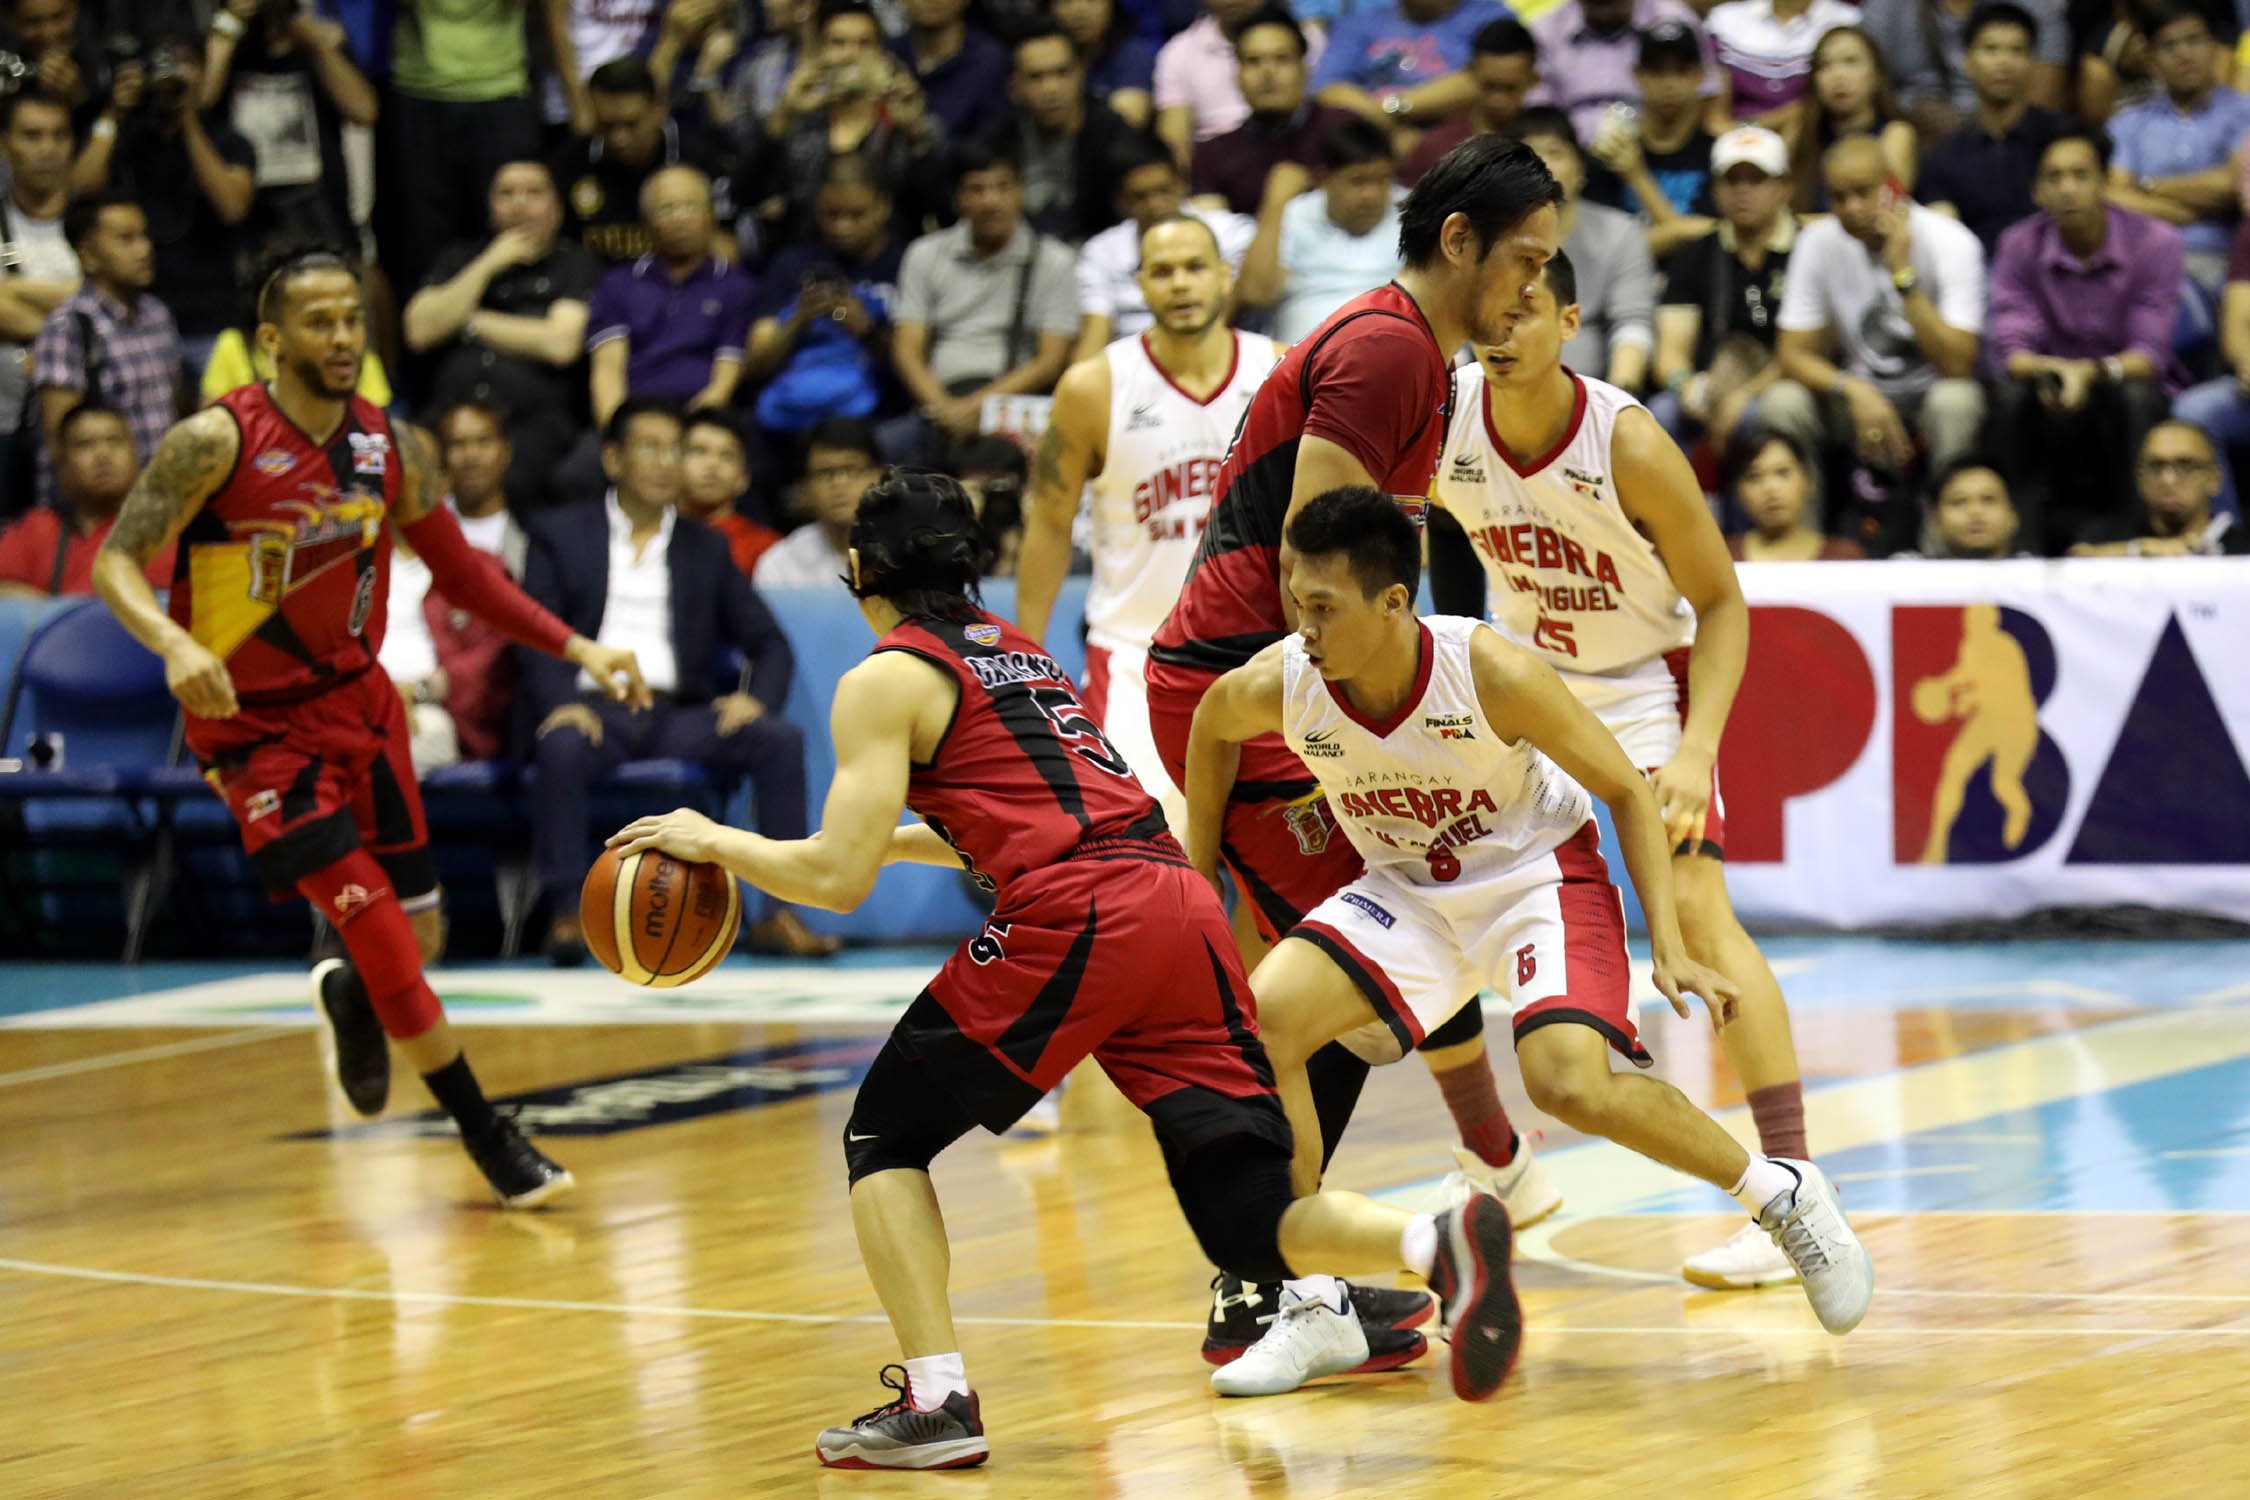 SMB's Cabagnot tries to elude BGSM Thompson